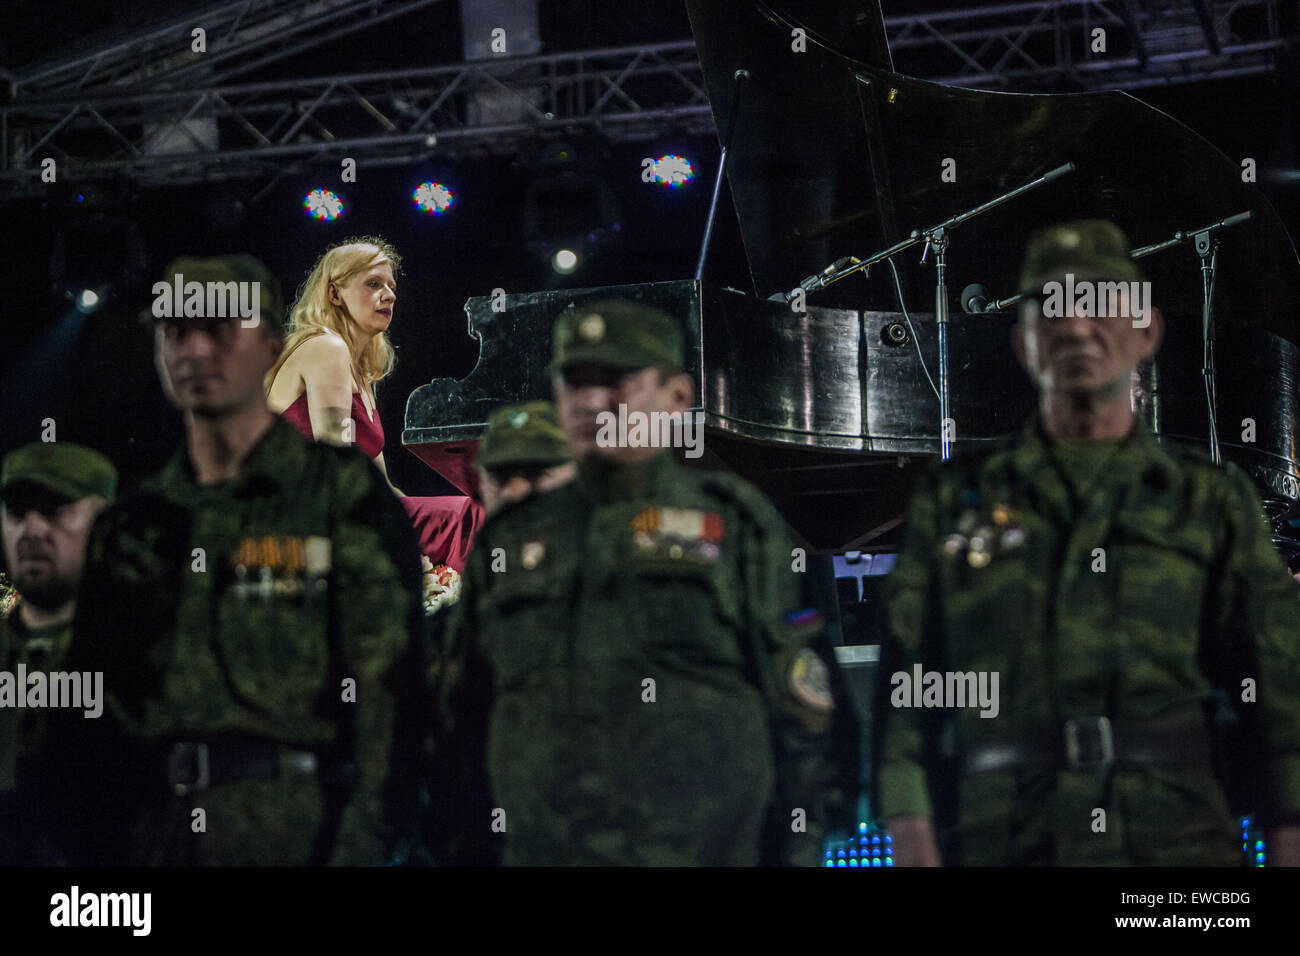 Donetsk, Donetsk oblast, Ukraine. 22nd June, 2015. Famous pianist Valentina Lisitsa, behind veterans of the current war against ukrainan army forces, during the concert dedicated to the 74th anniversary of the start of the Great Patriotic War.in Donetsk, Ukraine. © Celestino Arce/ZUMA Wire/ZUMAPRESS.com/Alamy Live News Stock Photo